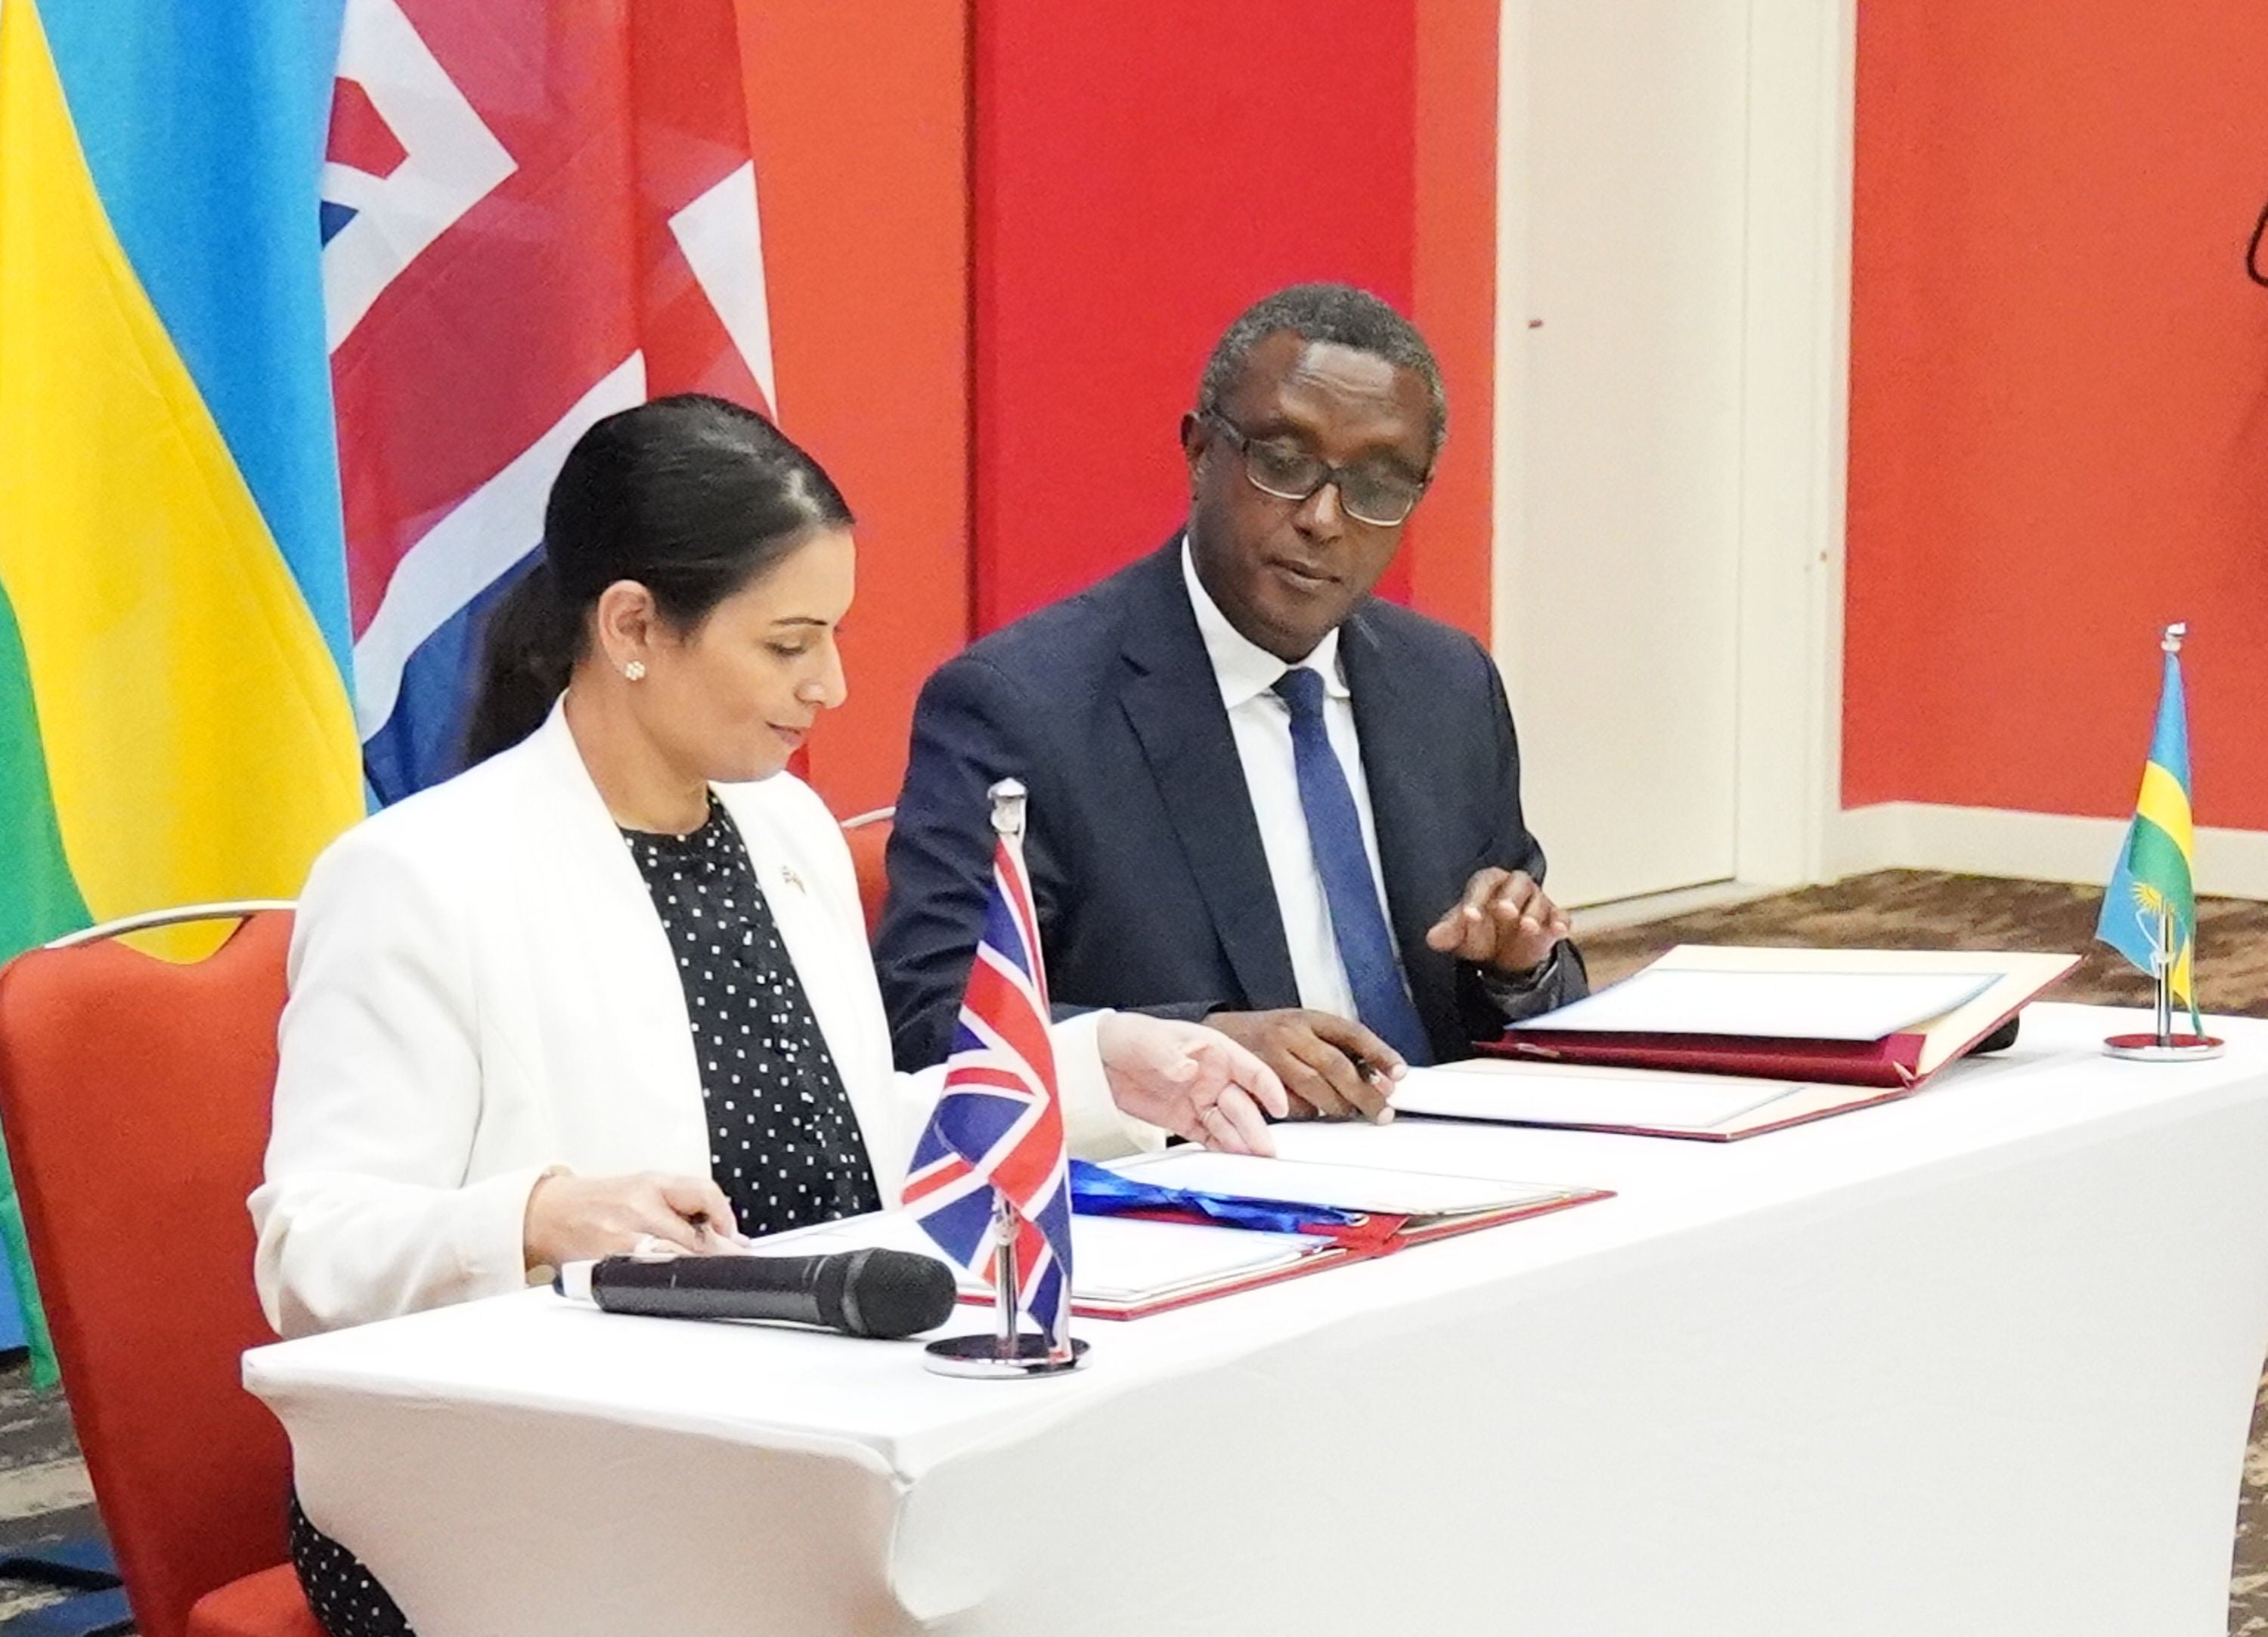 Home Secretary Priti Patel and Rwandan minister for foreign affairs and international co-operation, Vincent Biruta, signed a ‘world-first’ migration and economic development partnership